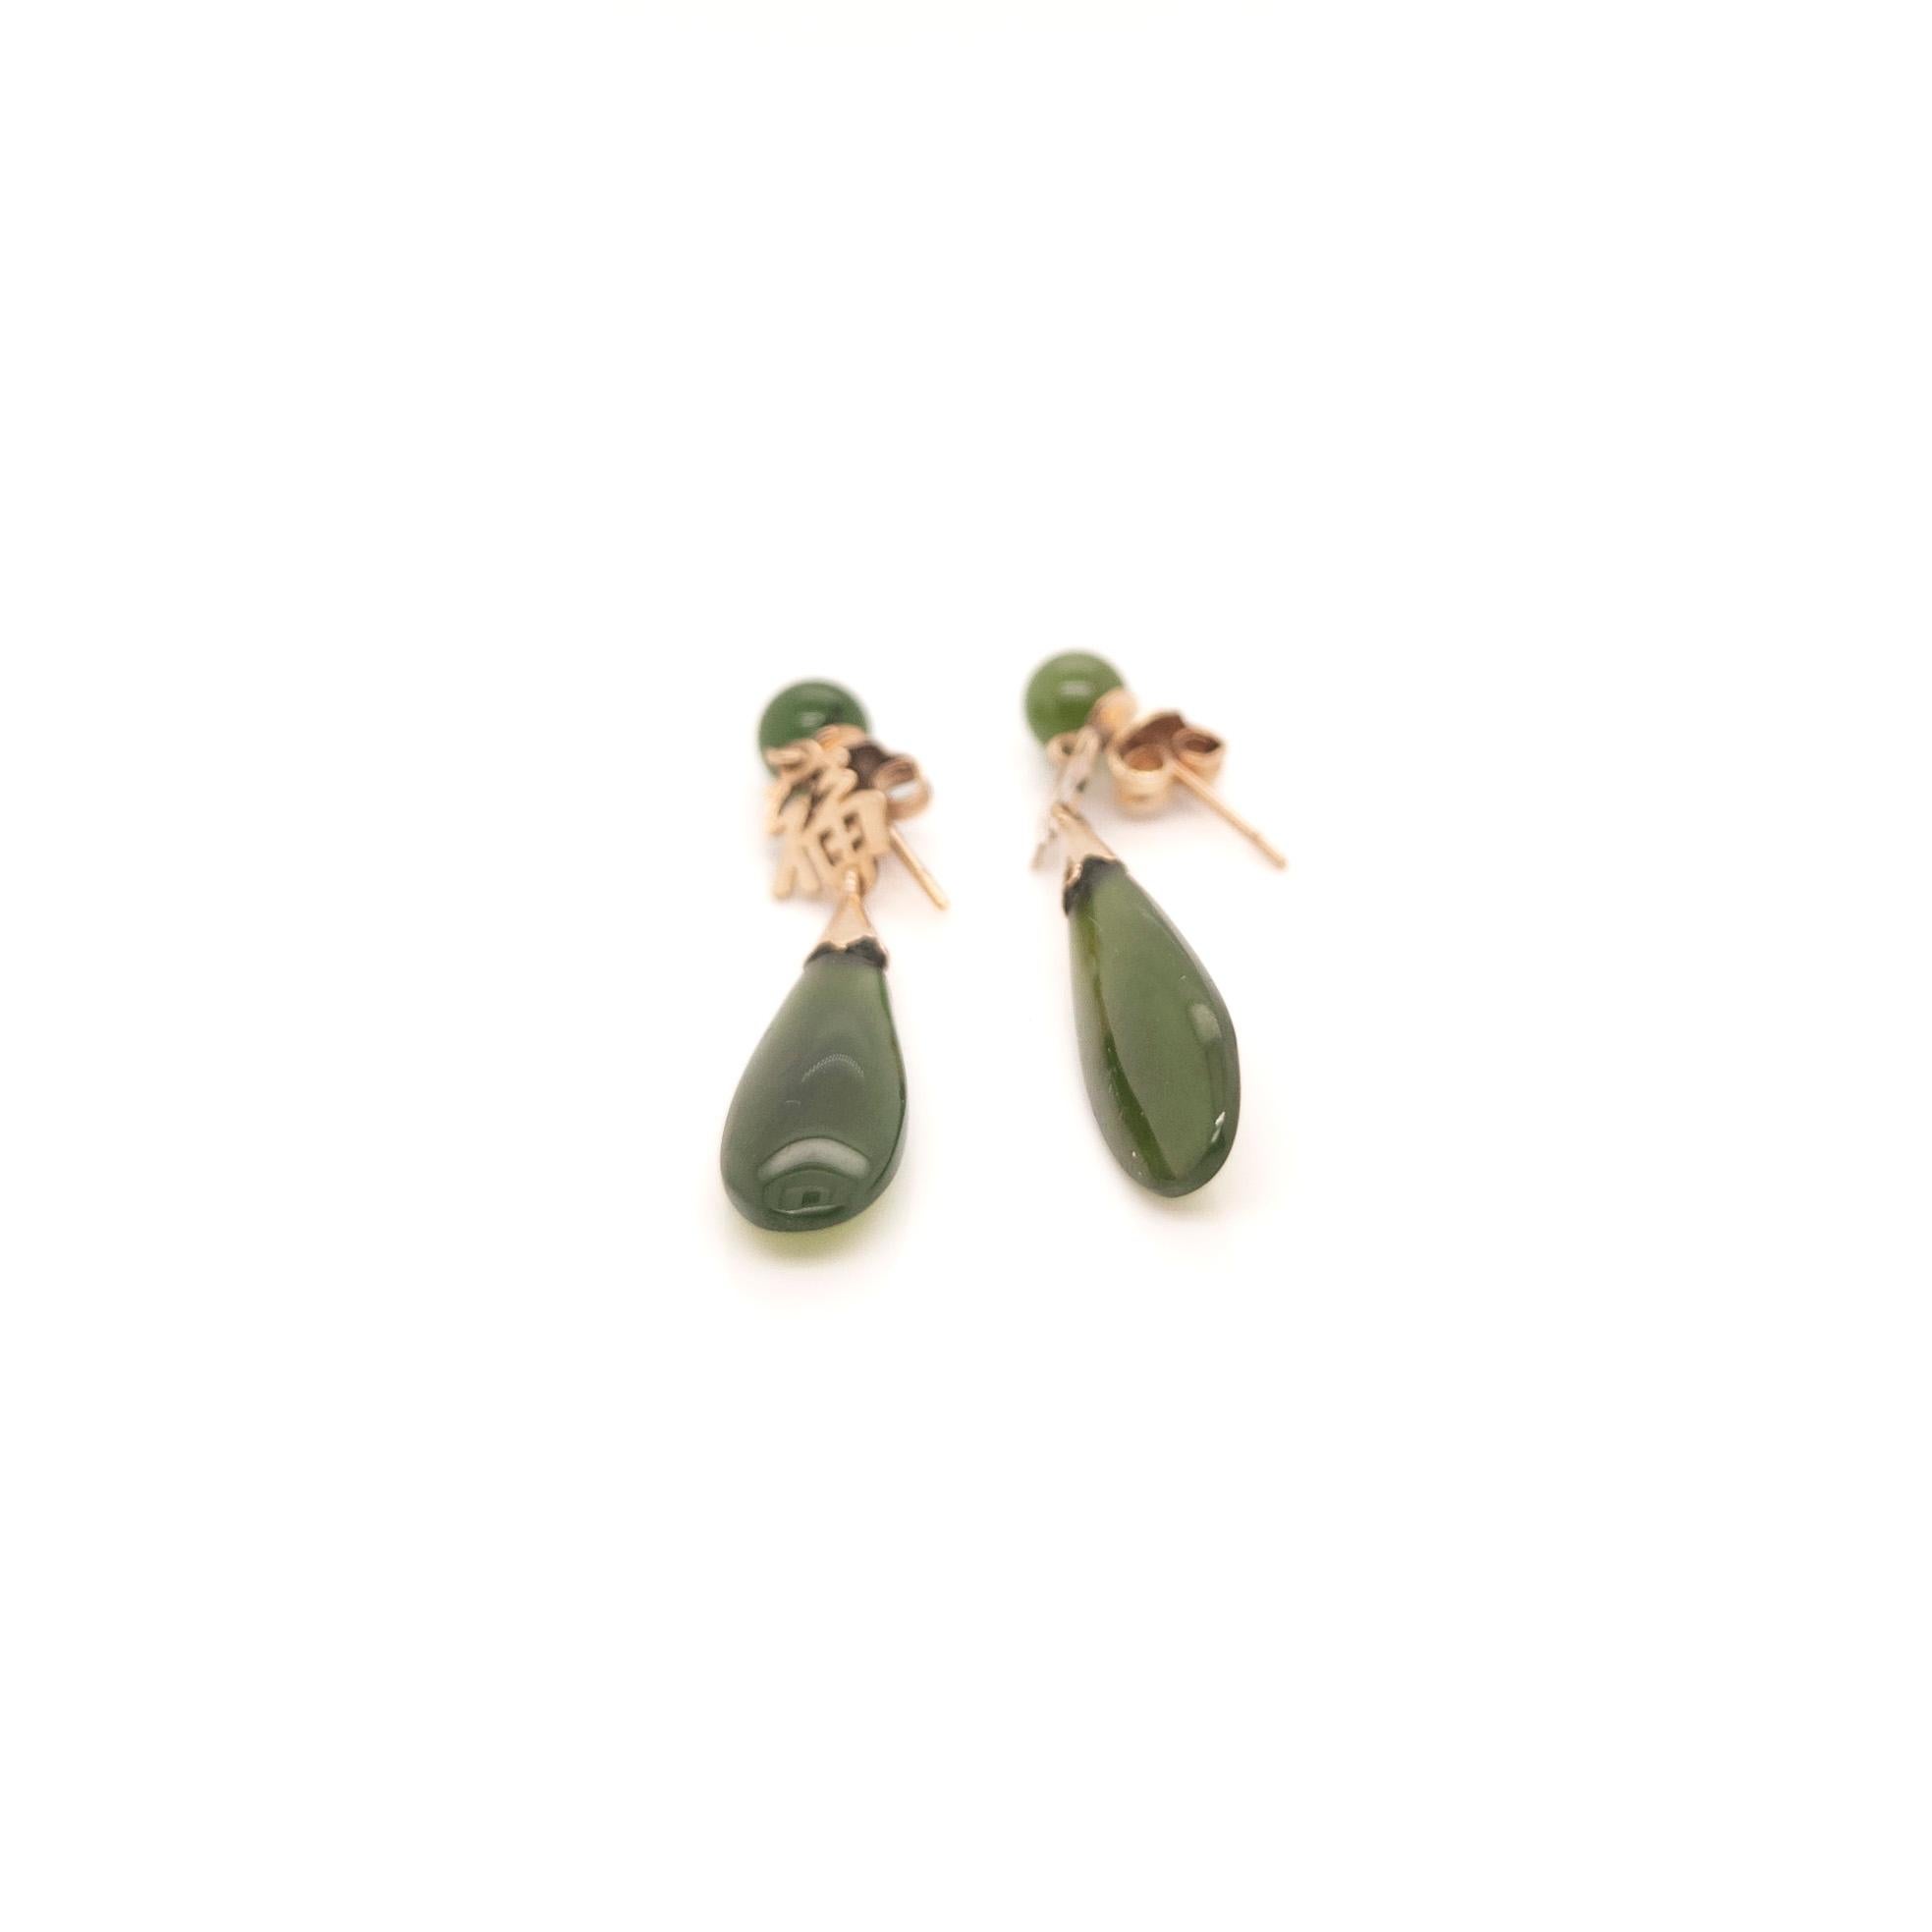 Vintage Chinese Gold & Jade 'Good Fortune' (福) Drop/Dangle Earrings  For Sale 5